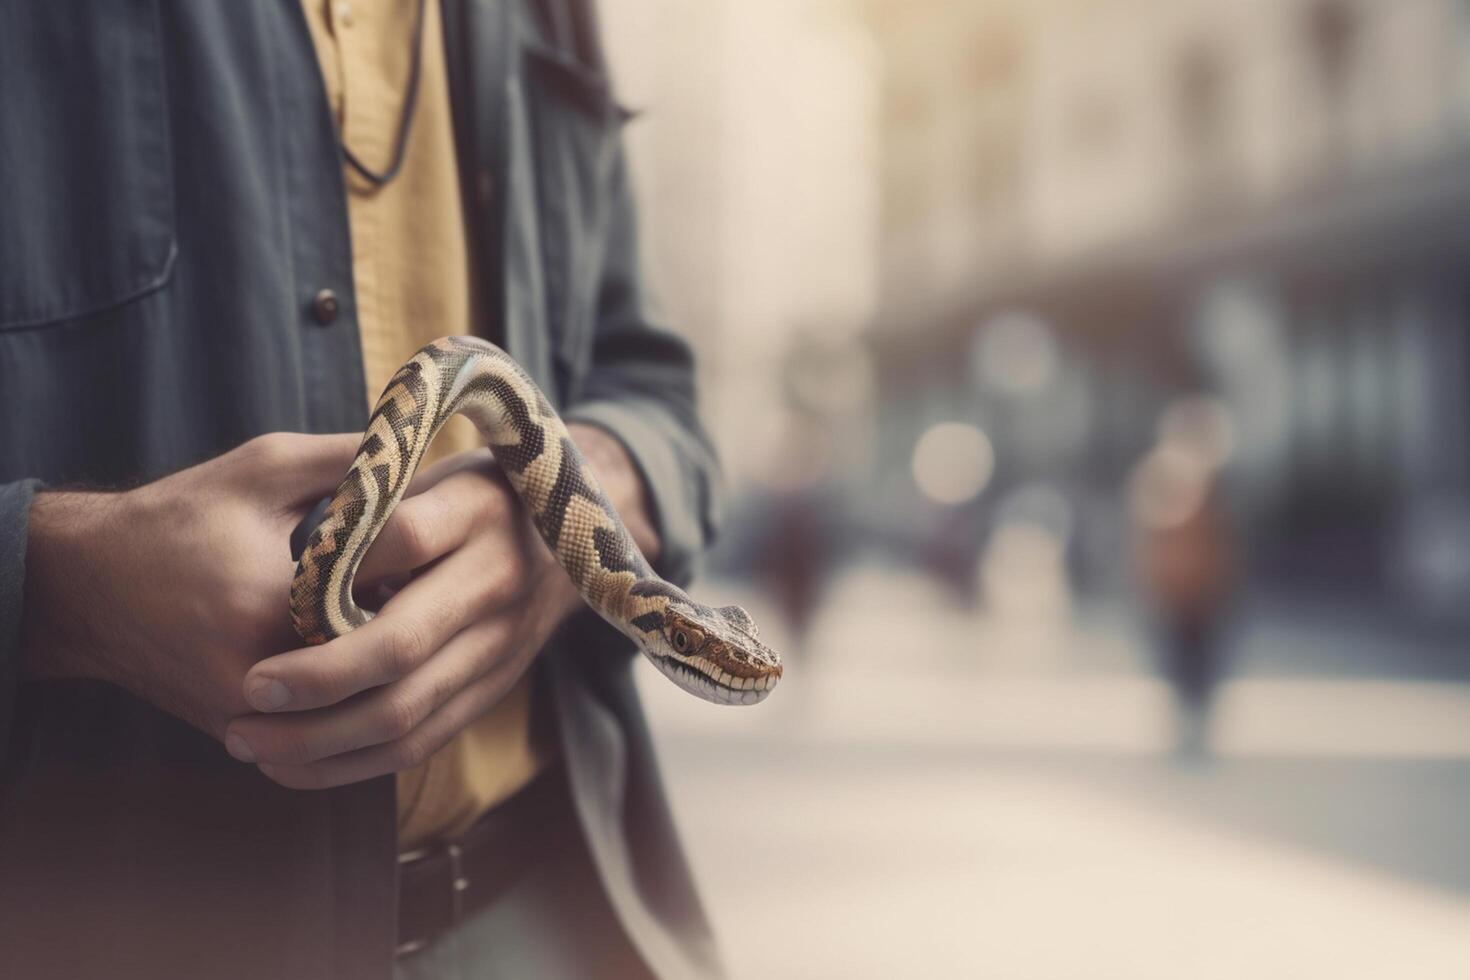 The Urban Serpent A Young Man and his Pet Snake Strolling through the City photo